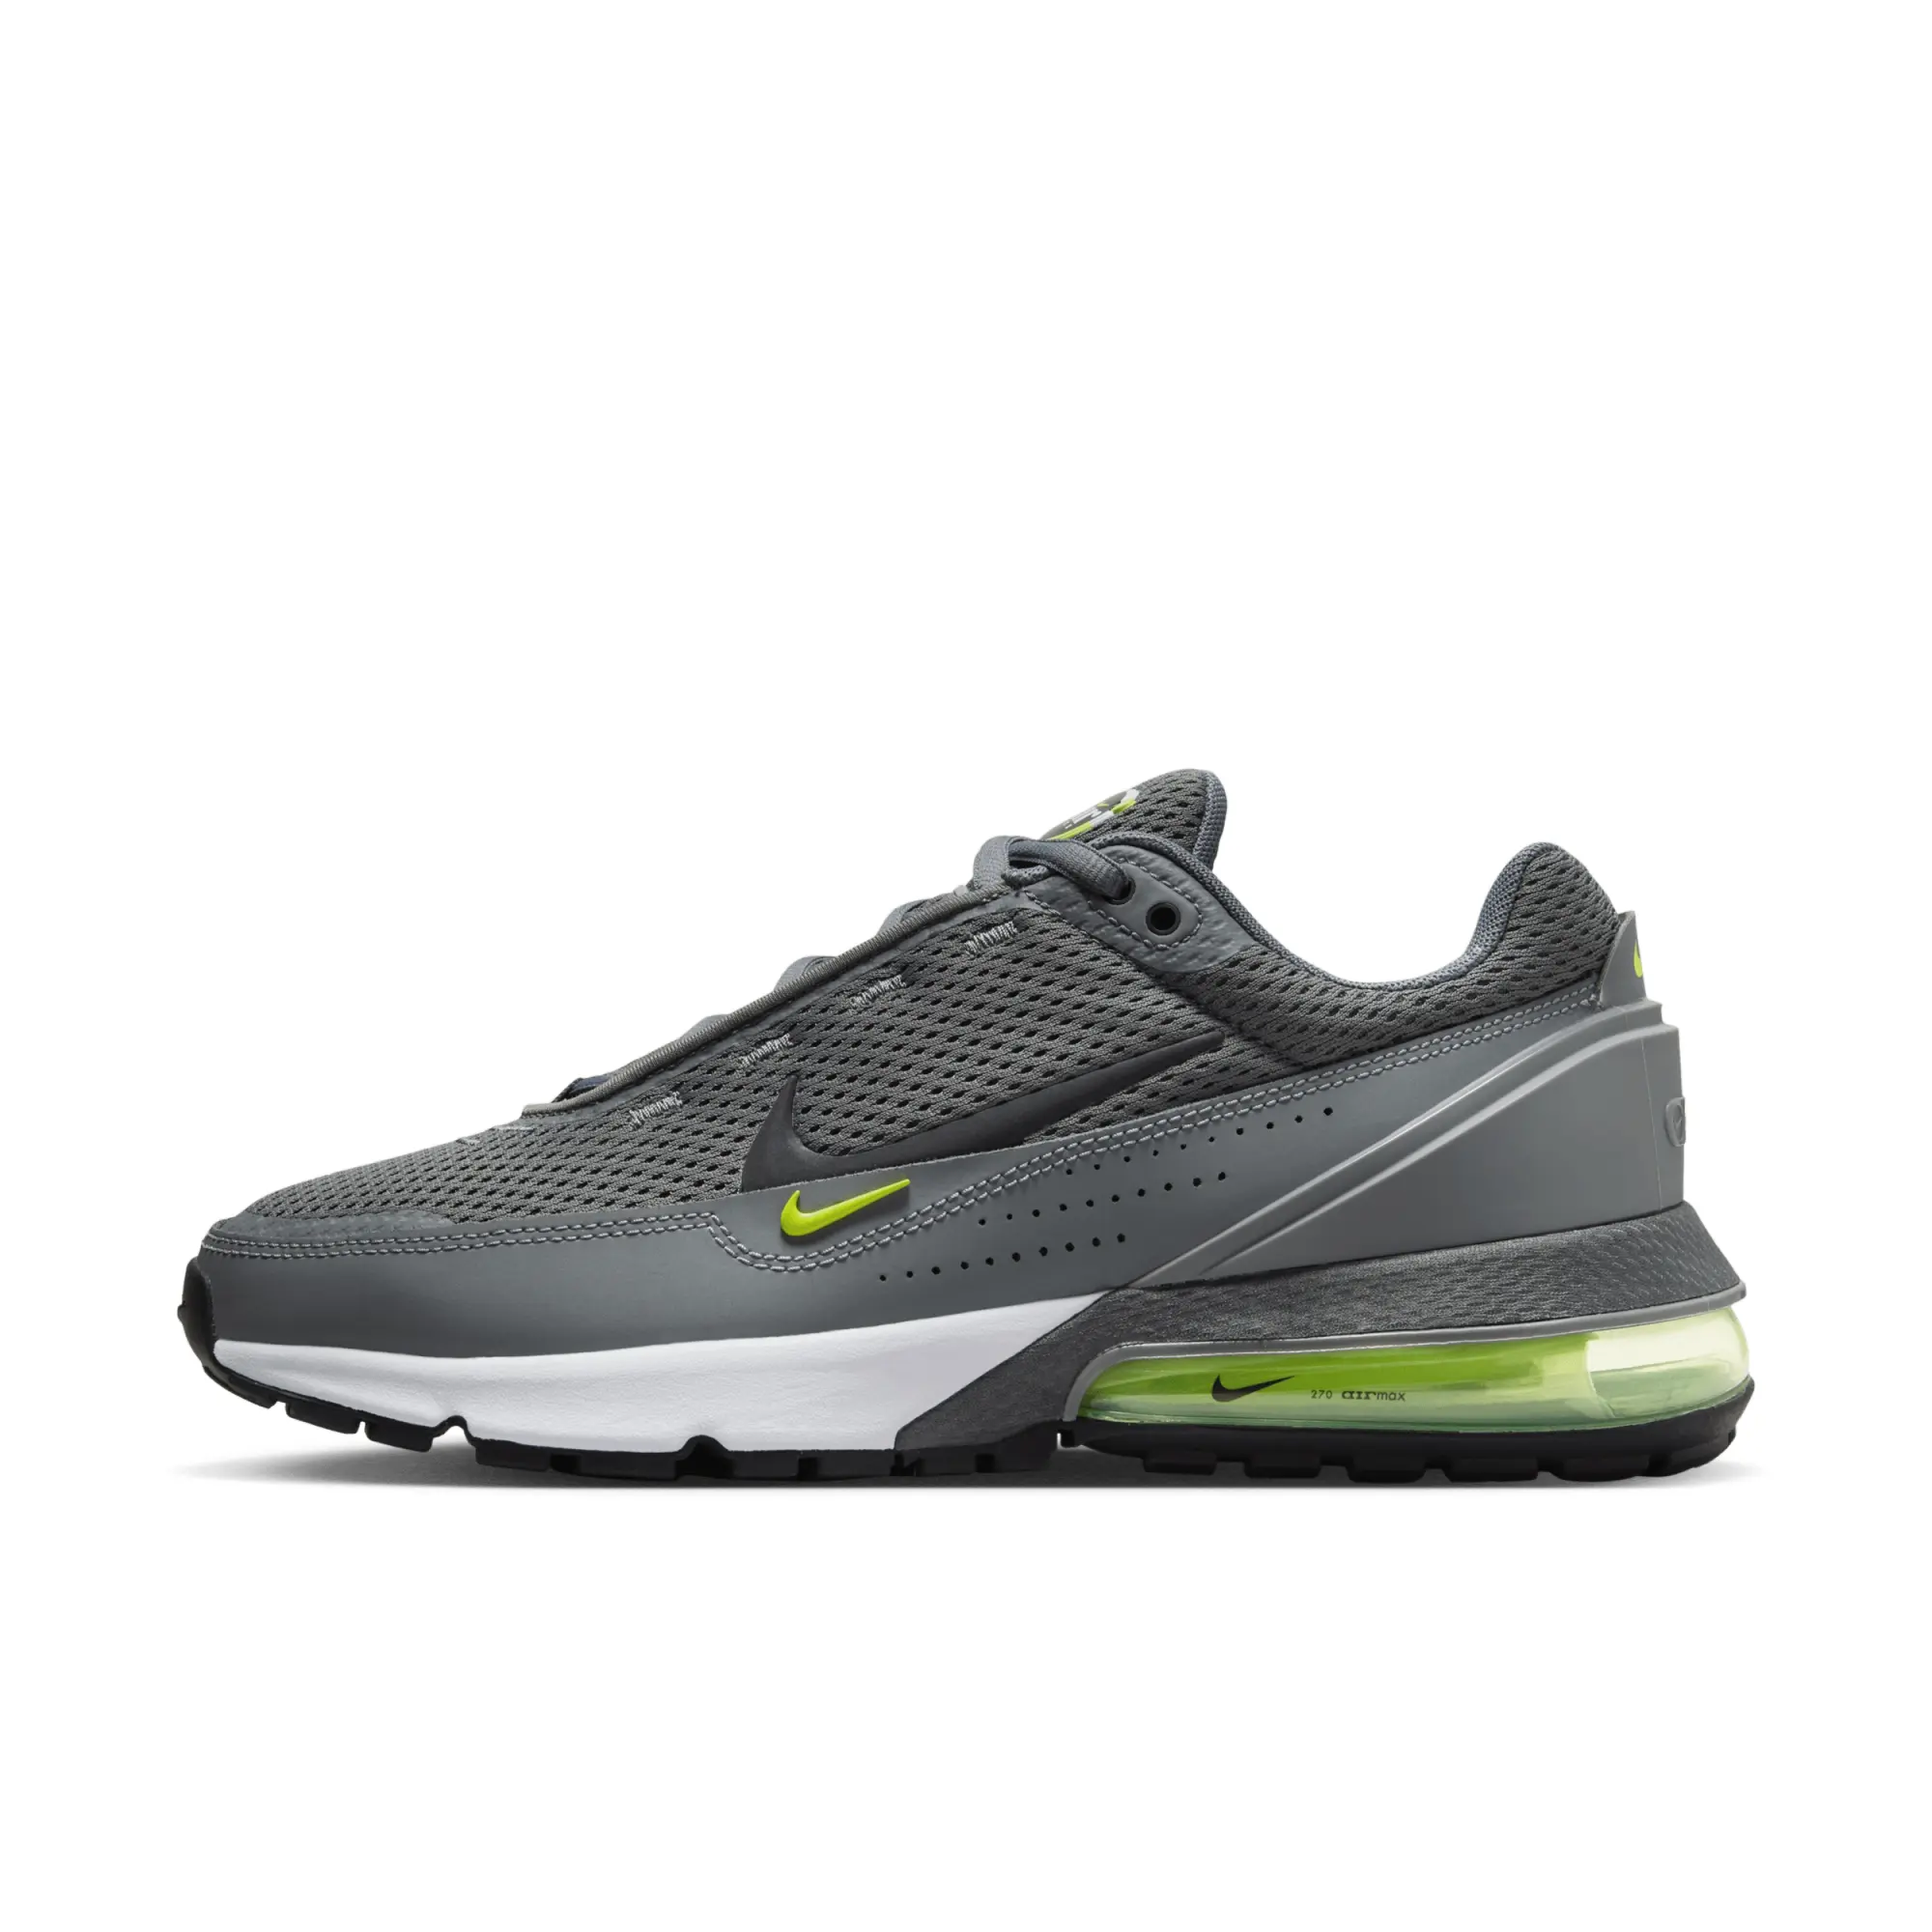 Nike Air Max Pulse SE Trainer - Smoke Grey / Anthracite / Volt